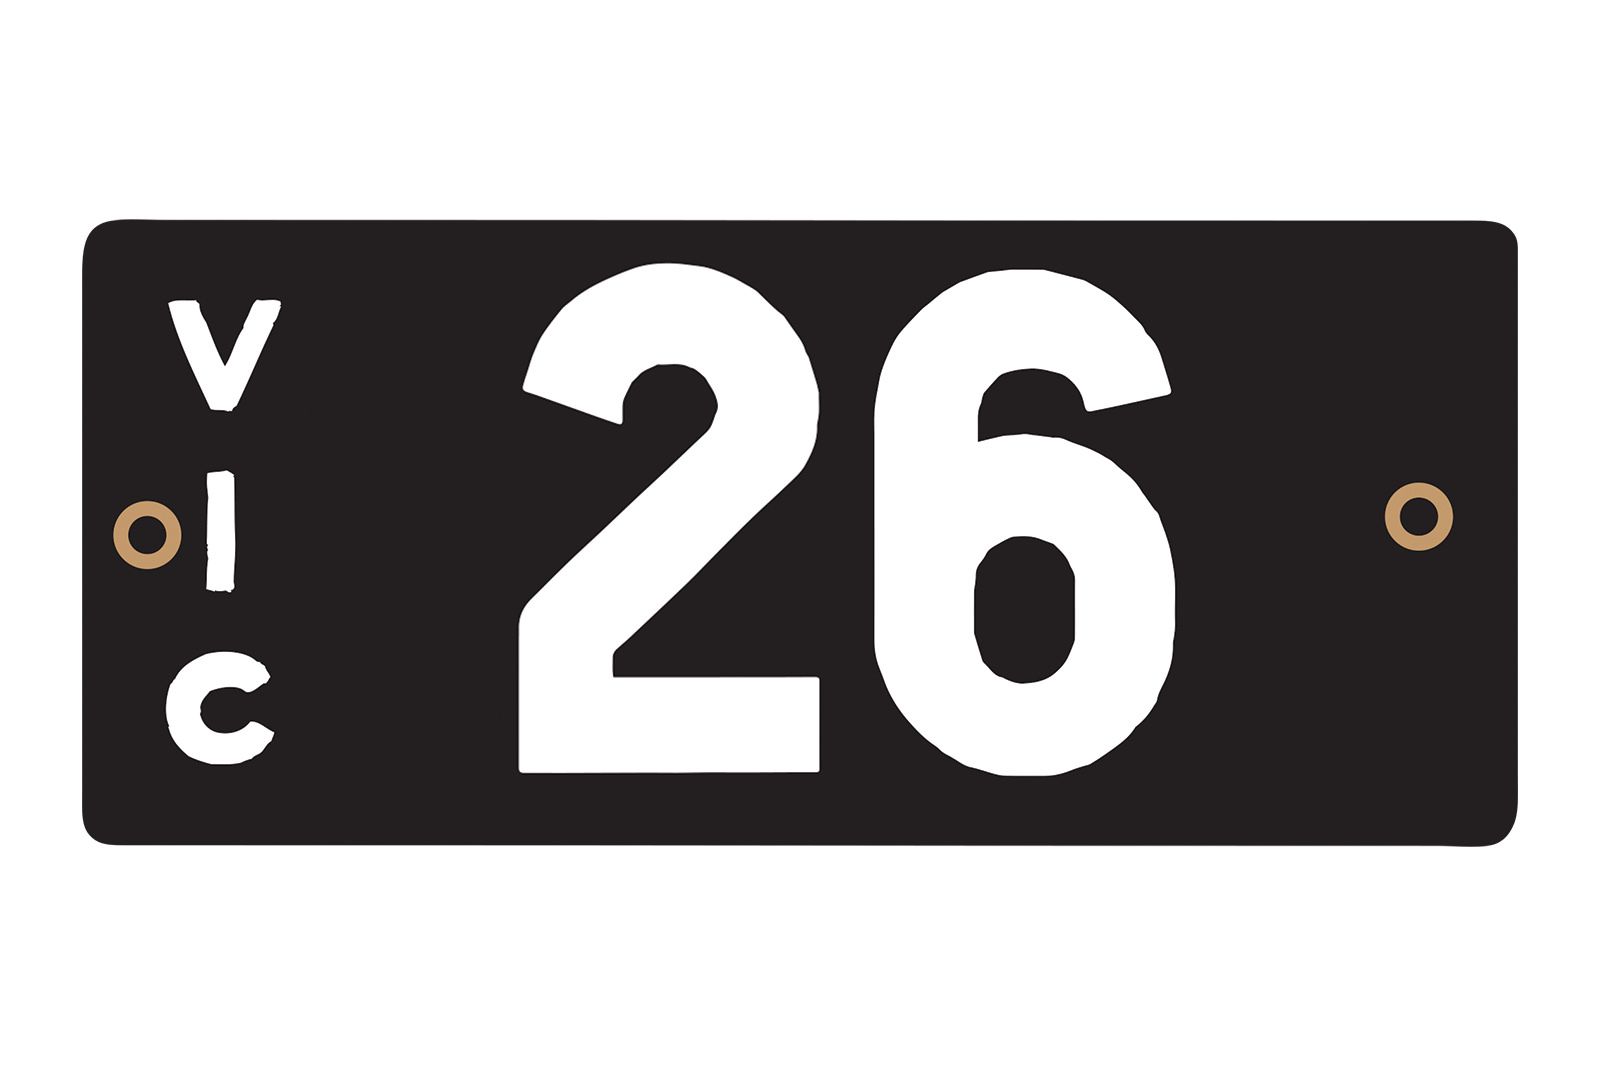 The Victorian Heritage Numerical Number Plate '26' which sold for $1.11m.